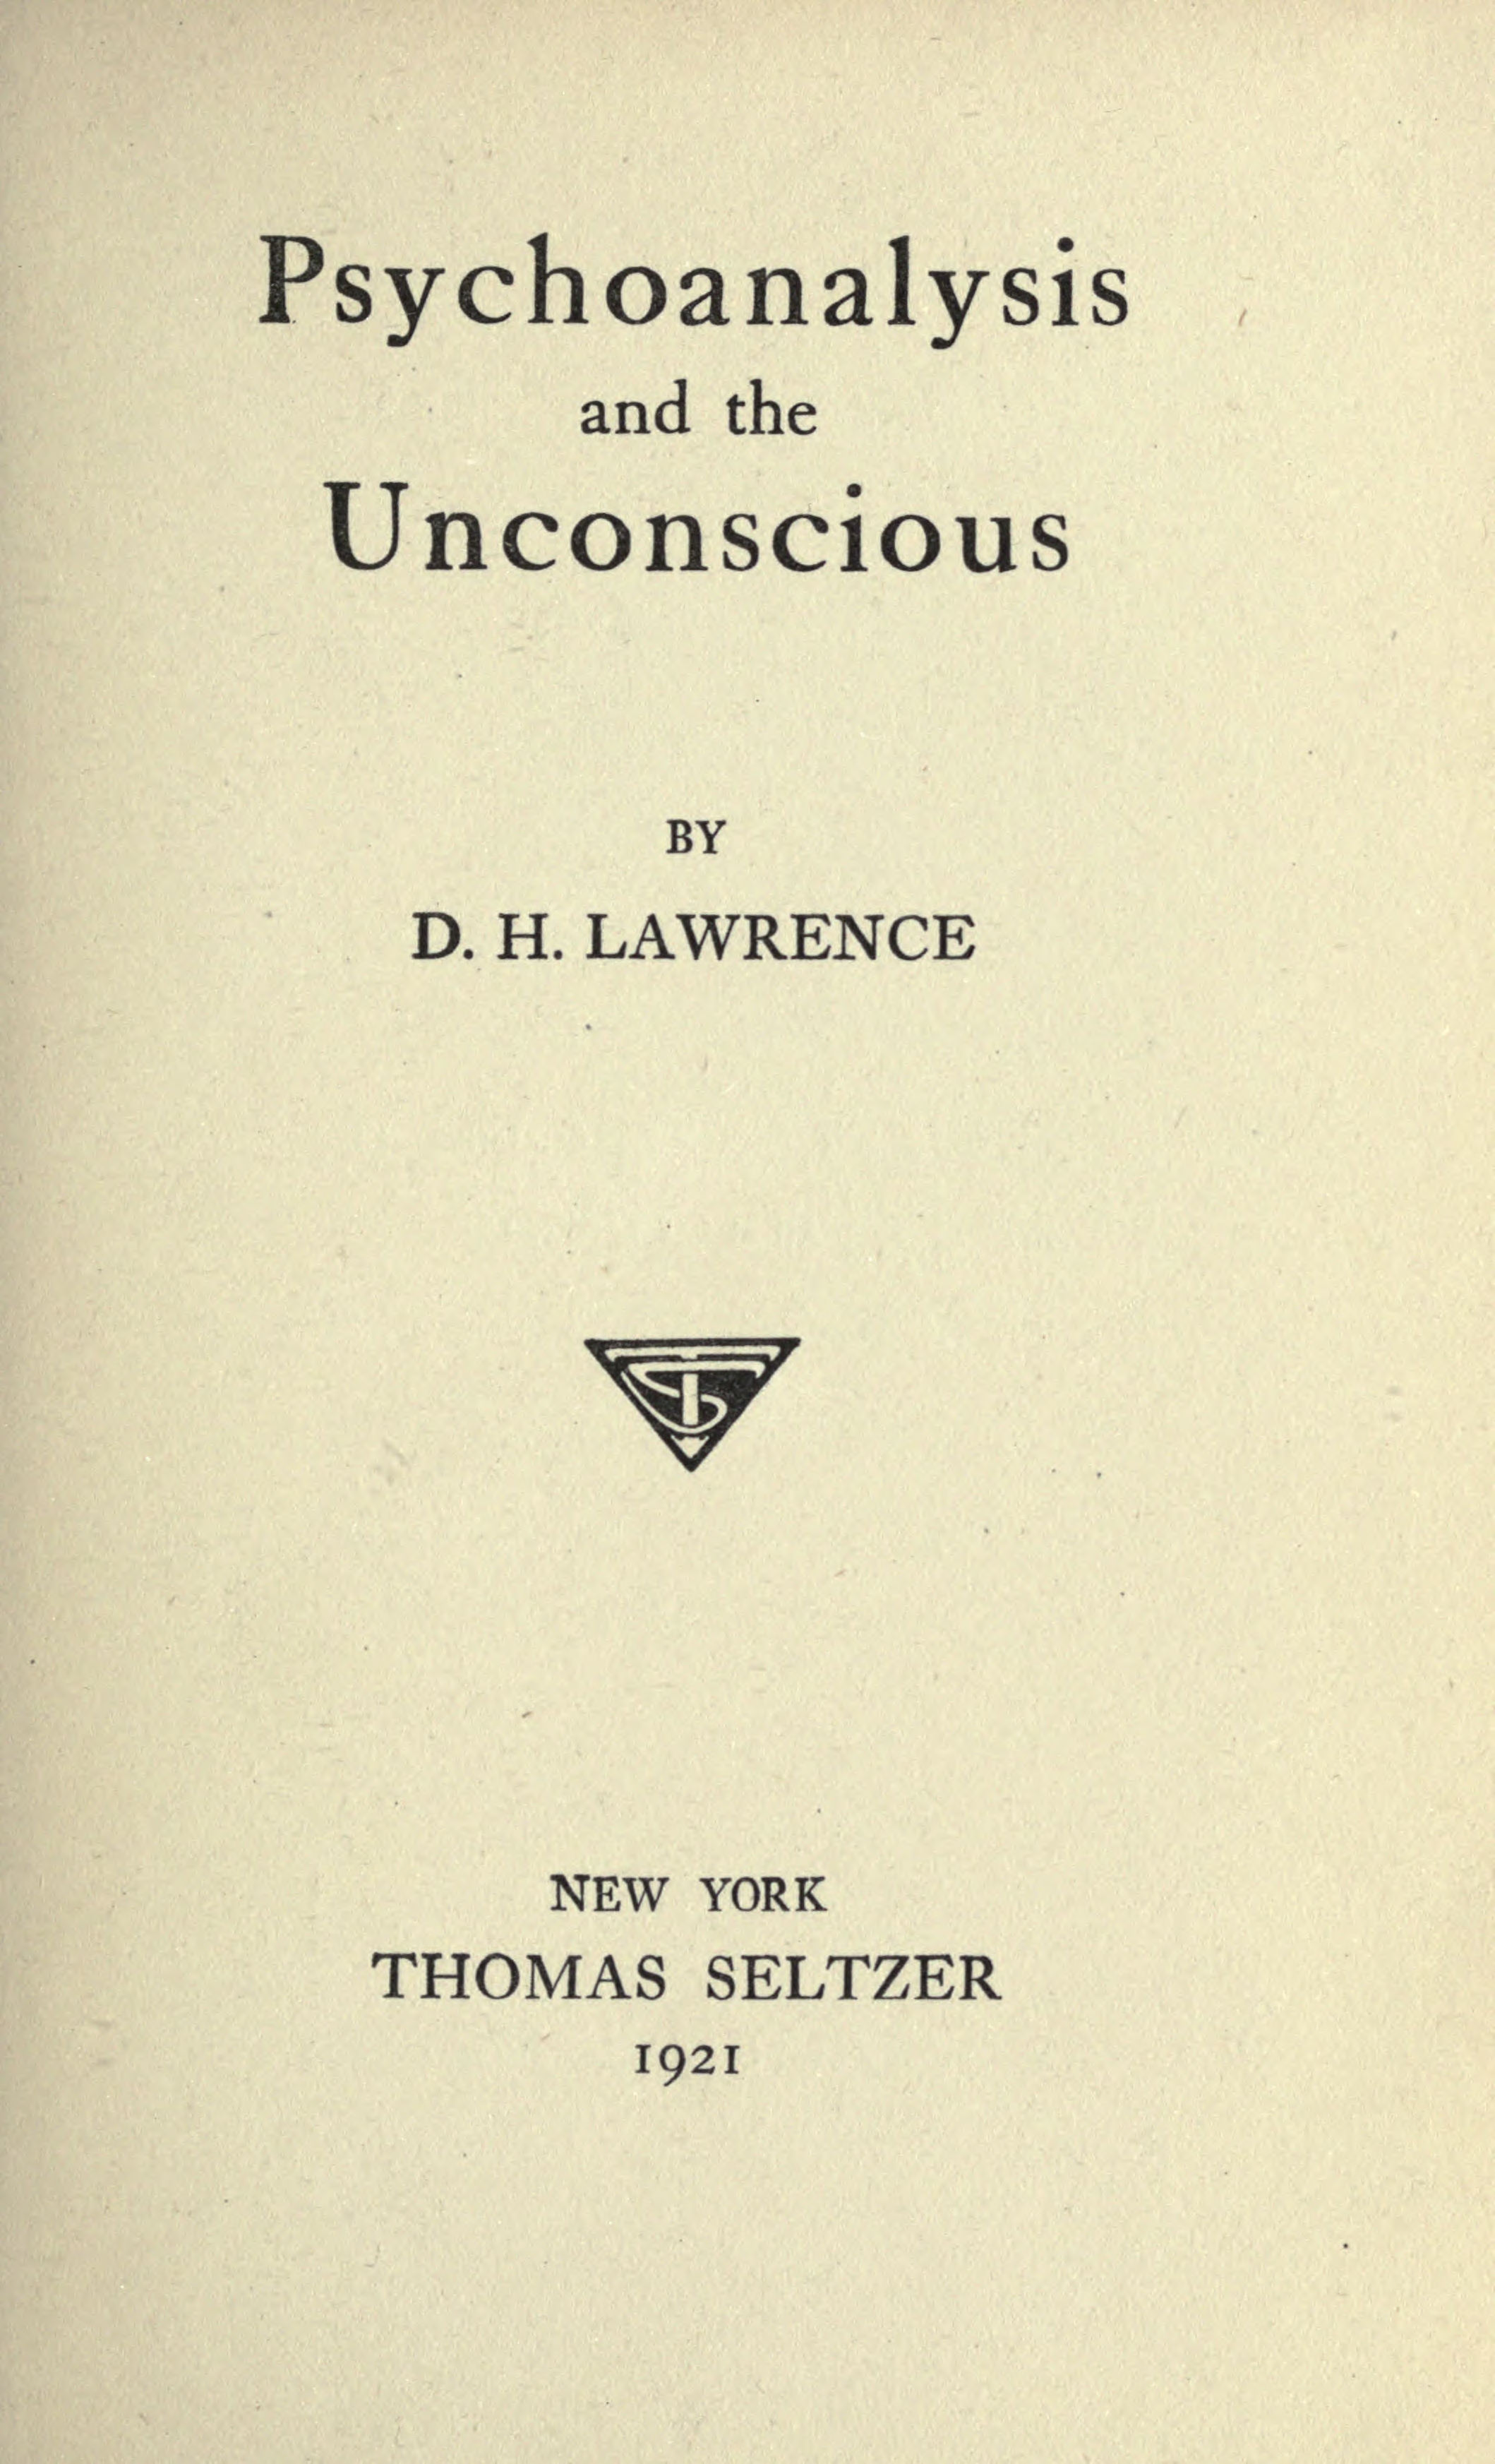 The Project Gutenberg eBook of Psychoanalysis and the unconscious, by D pic